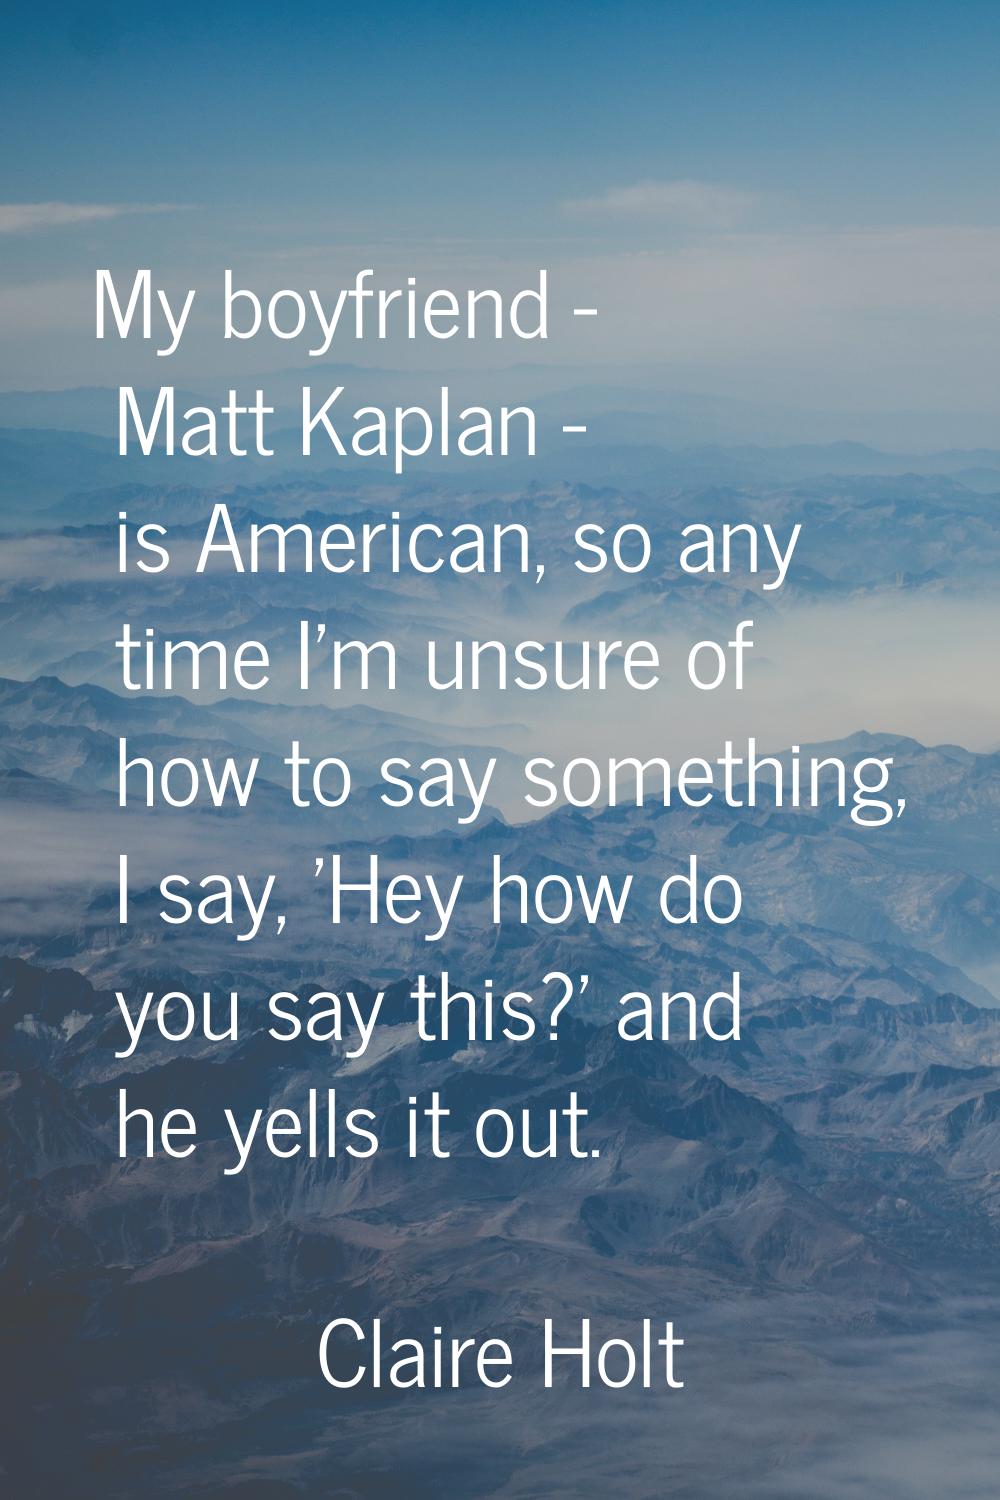 My boyfriend - Matt Kaplan - is American, so any time I'm unsure of how to say something, I say, 'H